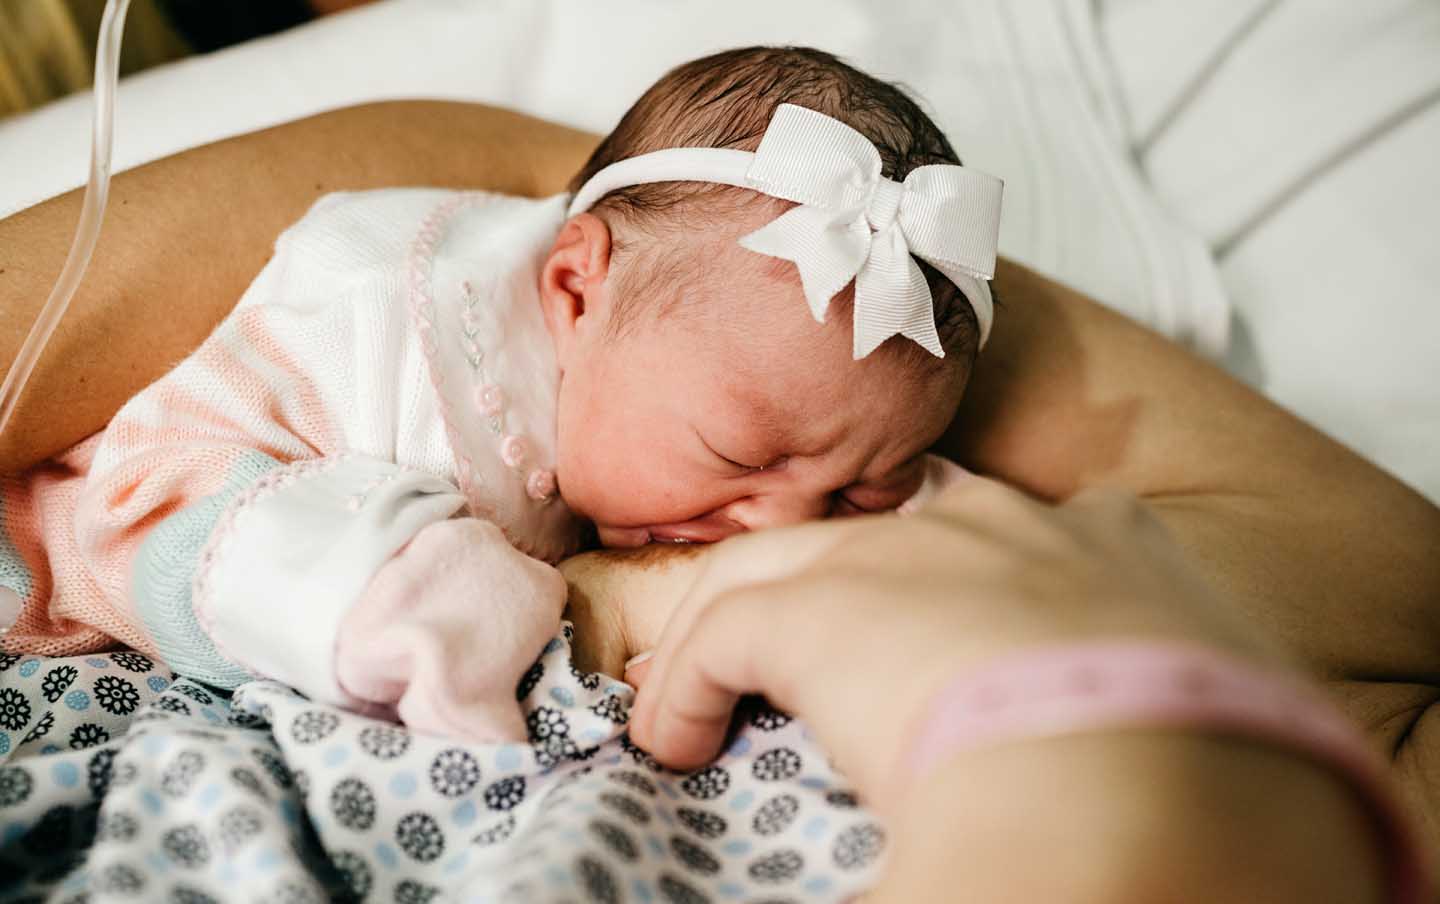 Breastfeeding right after birth - Photo by Jonathan Borba from Pexels
